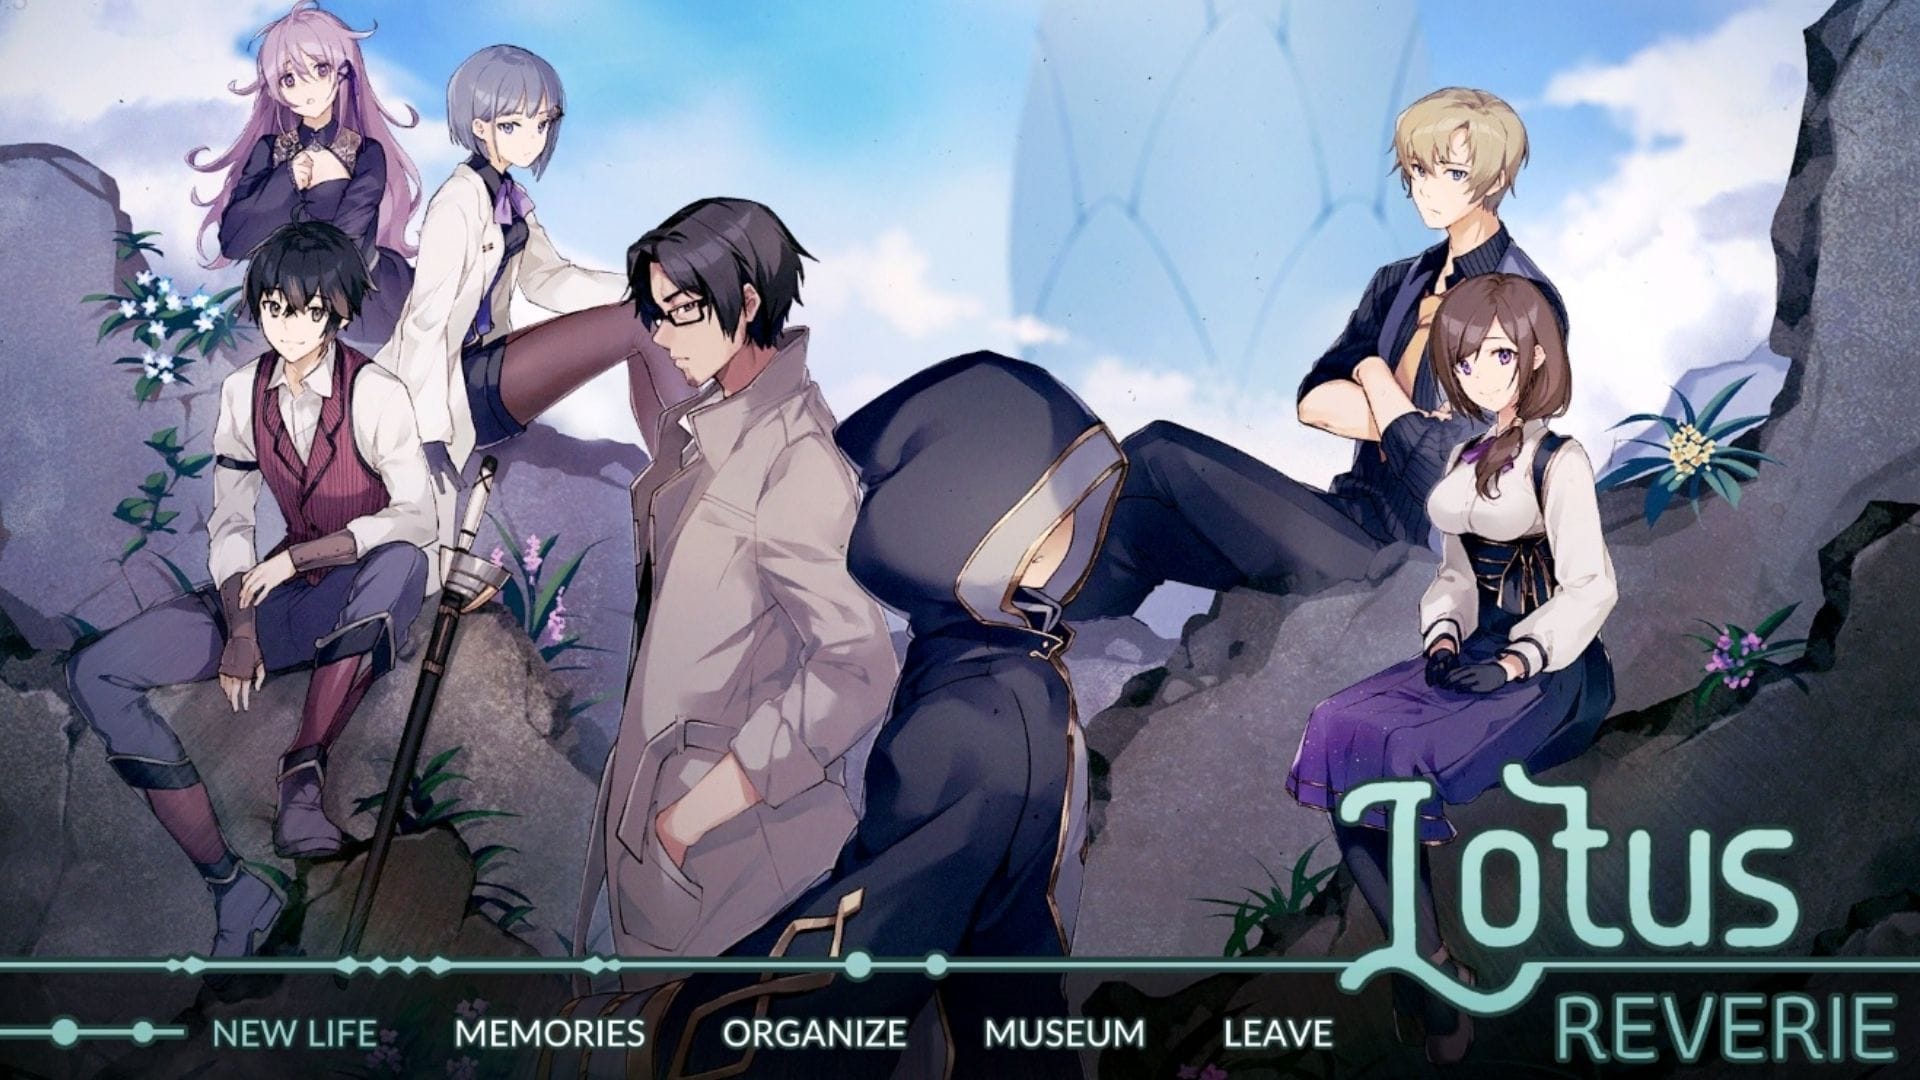 The title screen to Lotus Reverie: First Nexus, showing the main characters